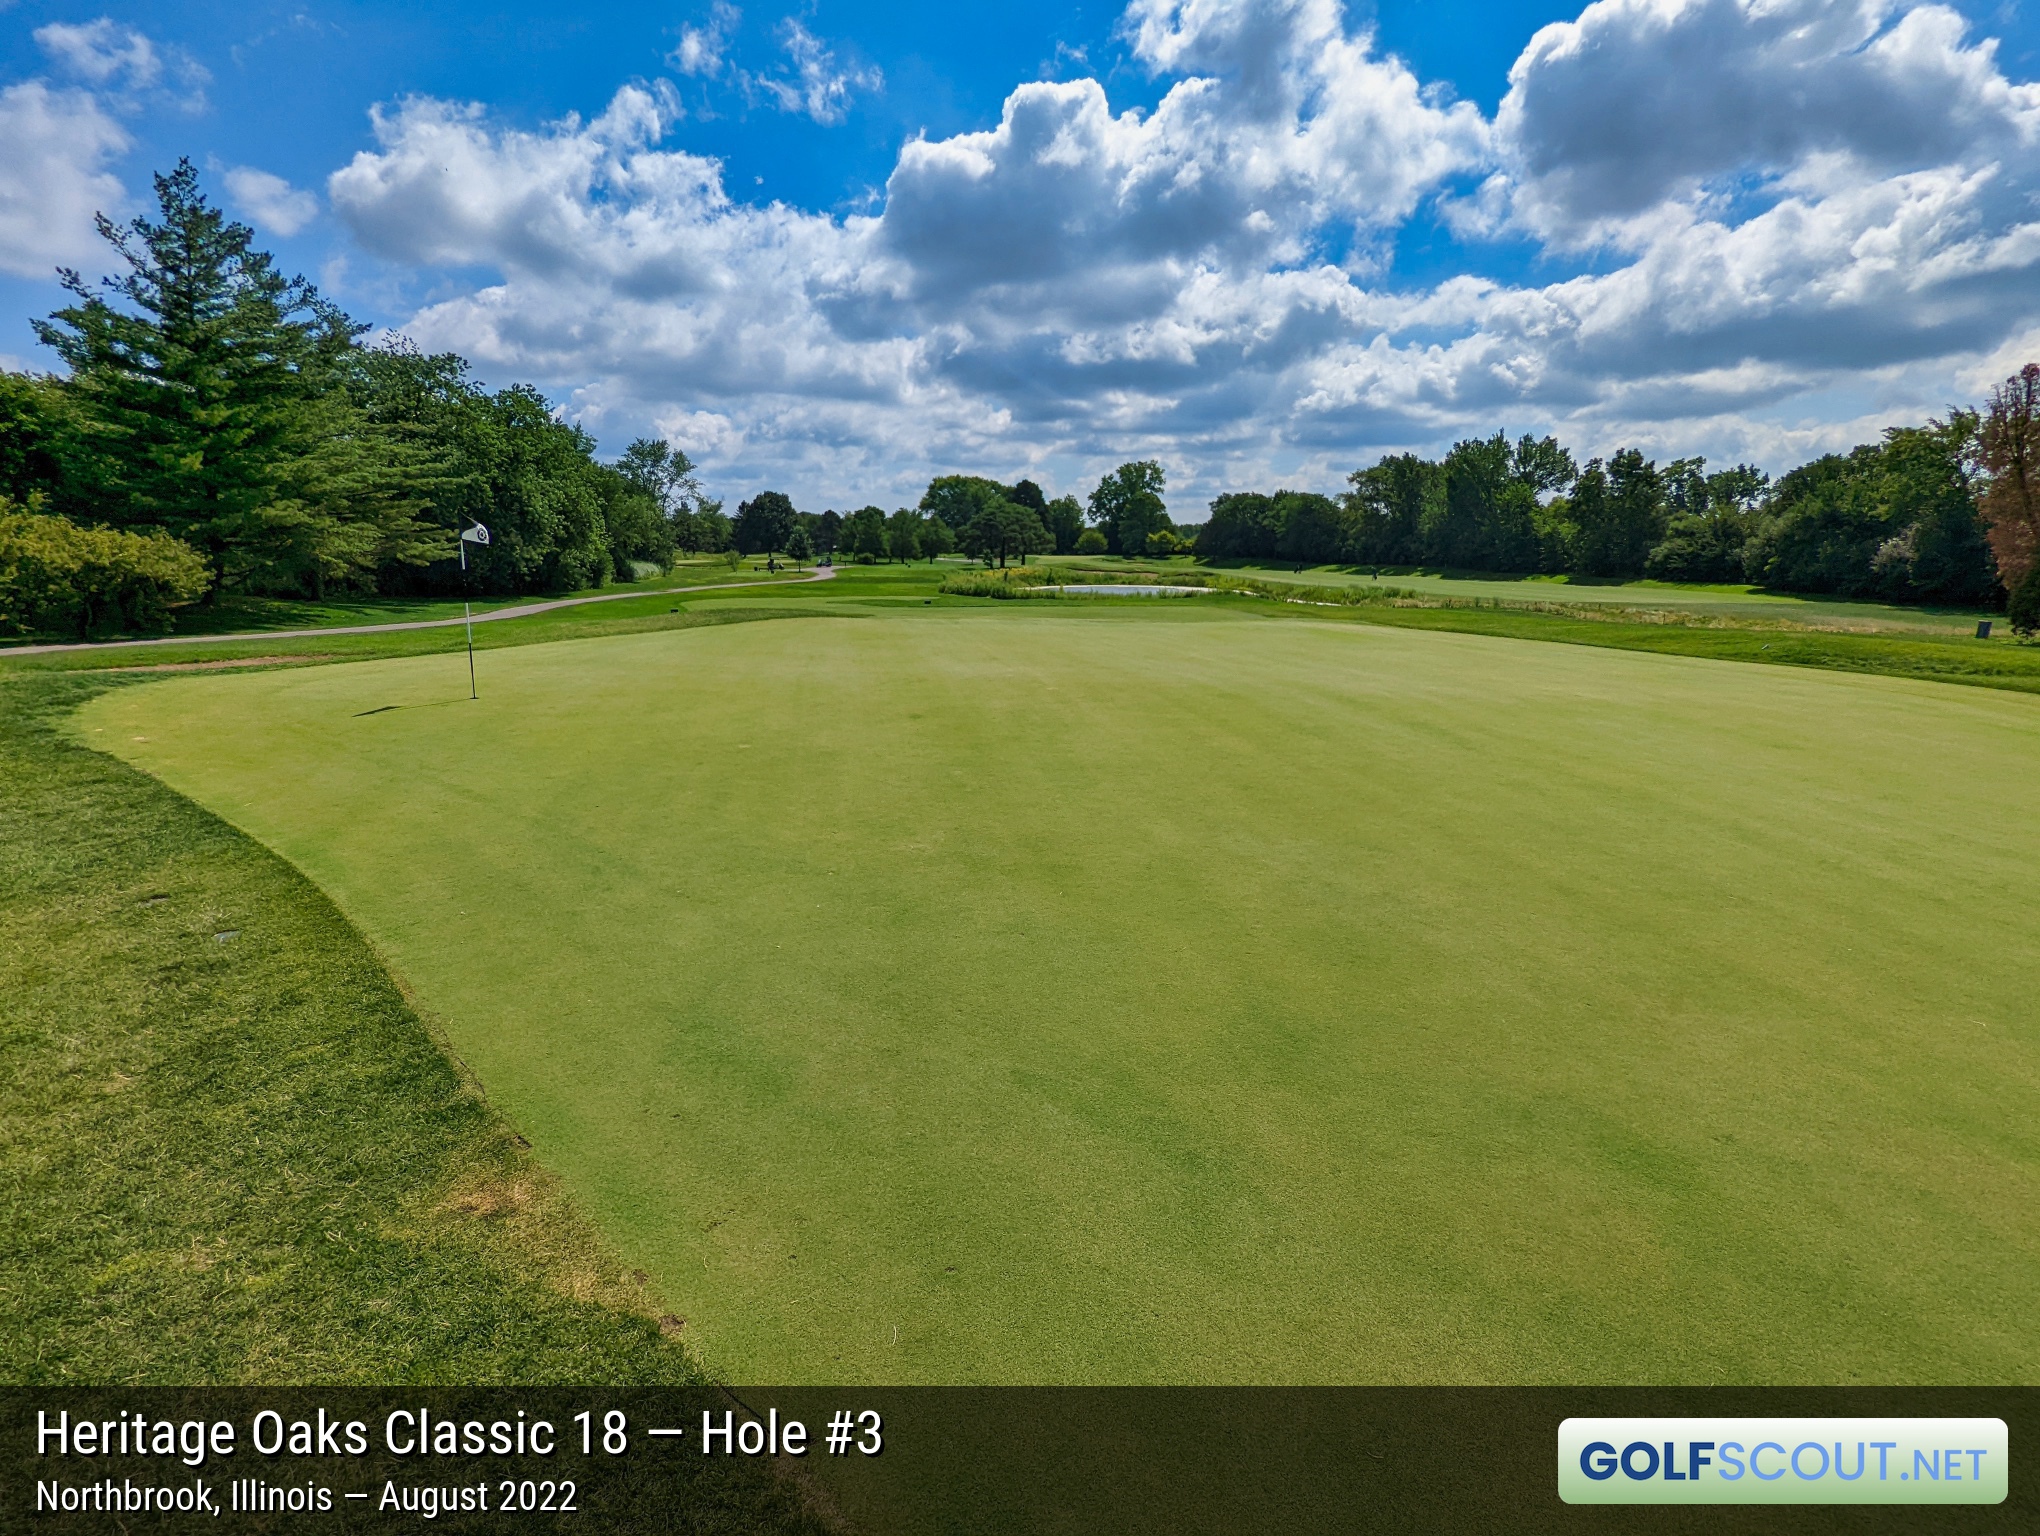 Photo of hole #3 at Heritage Oaks Golf Club - Classic 18 in Northbrook, Illinois. 